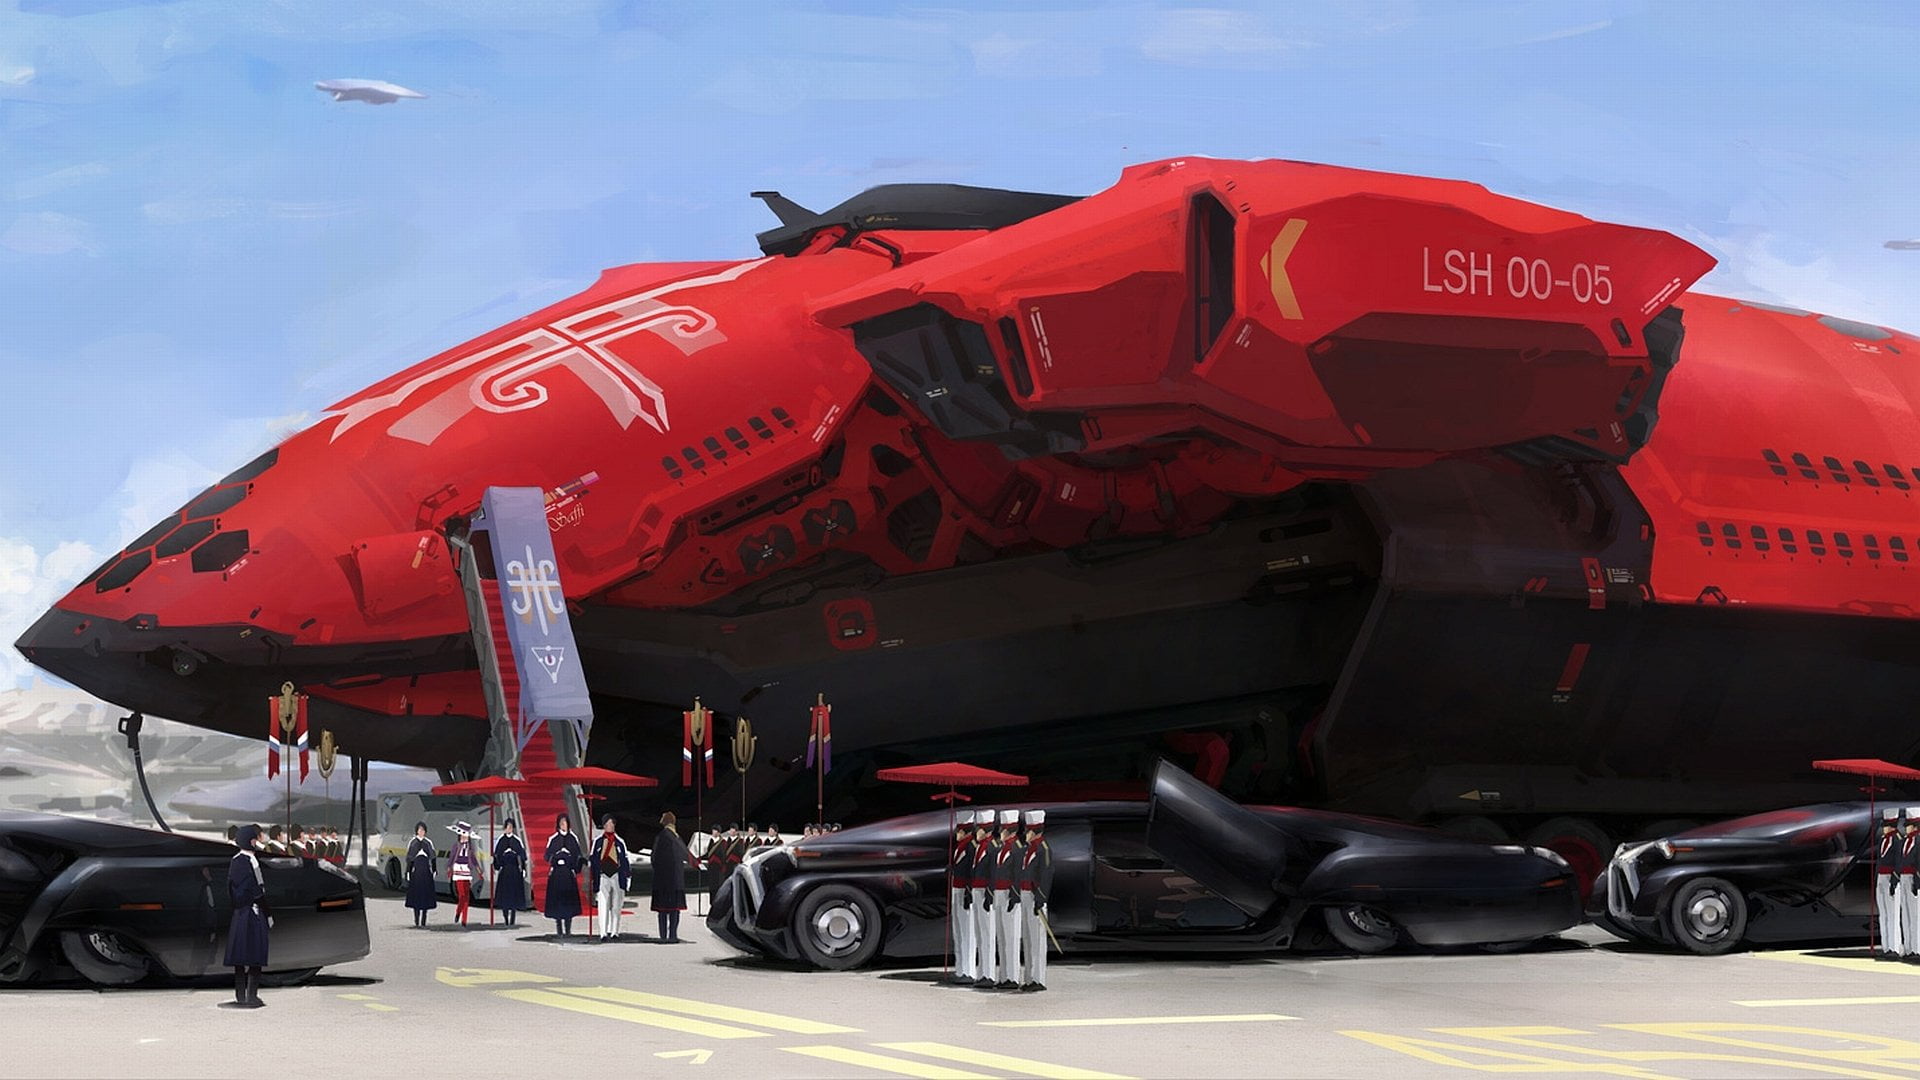 red spacecraft, Sci Fi, Spaceship, mode of transportation, air vehicle